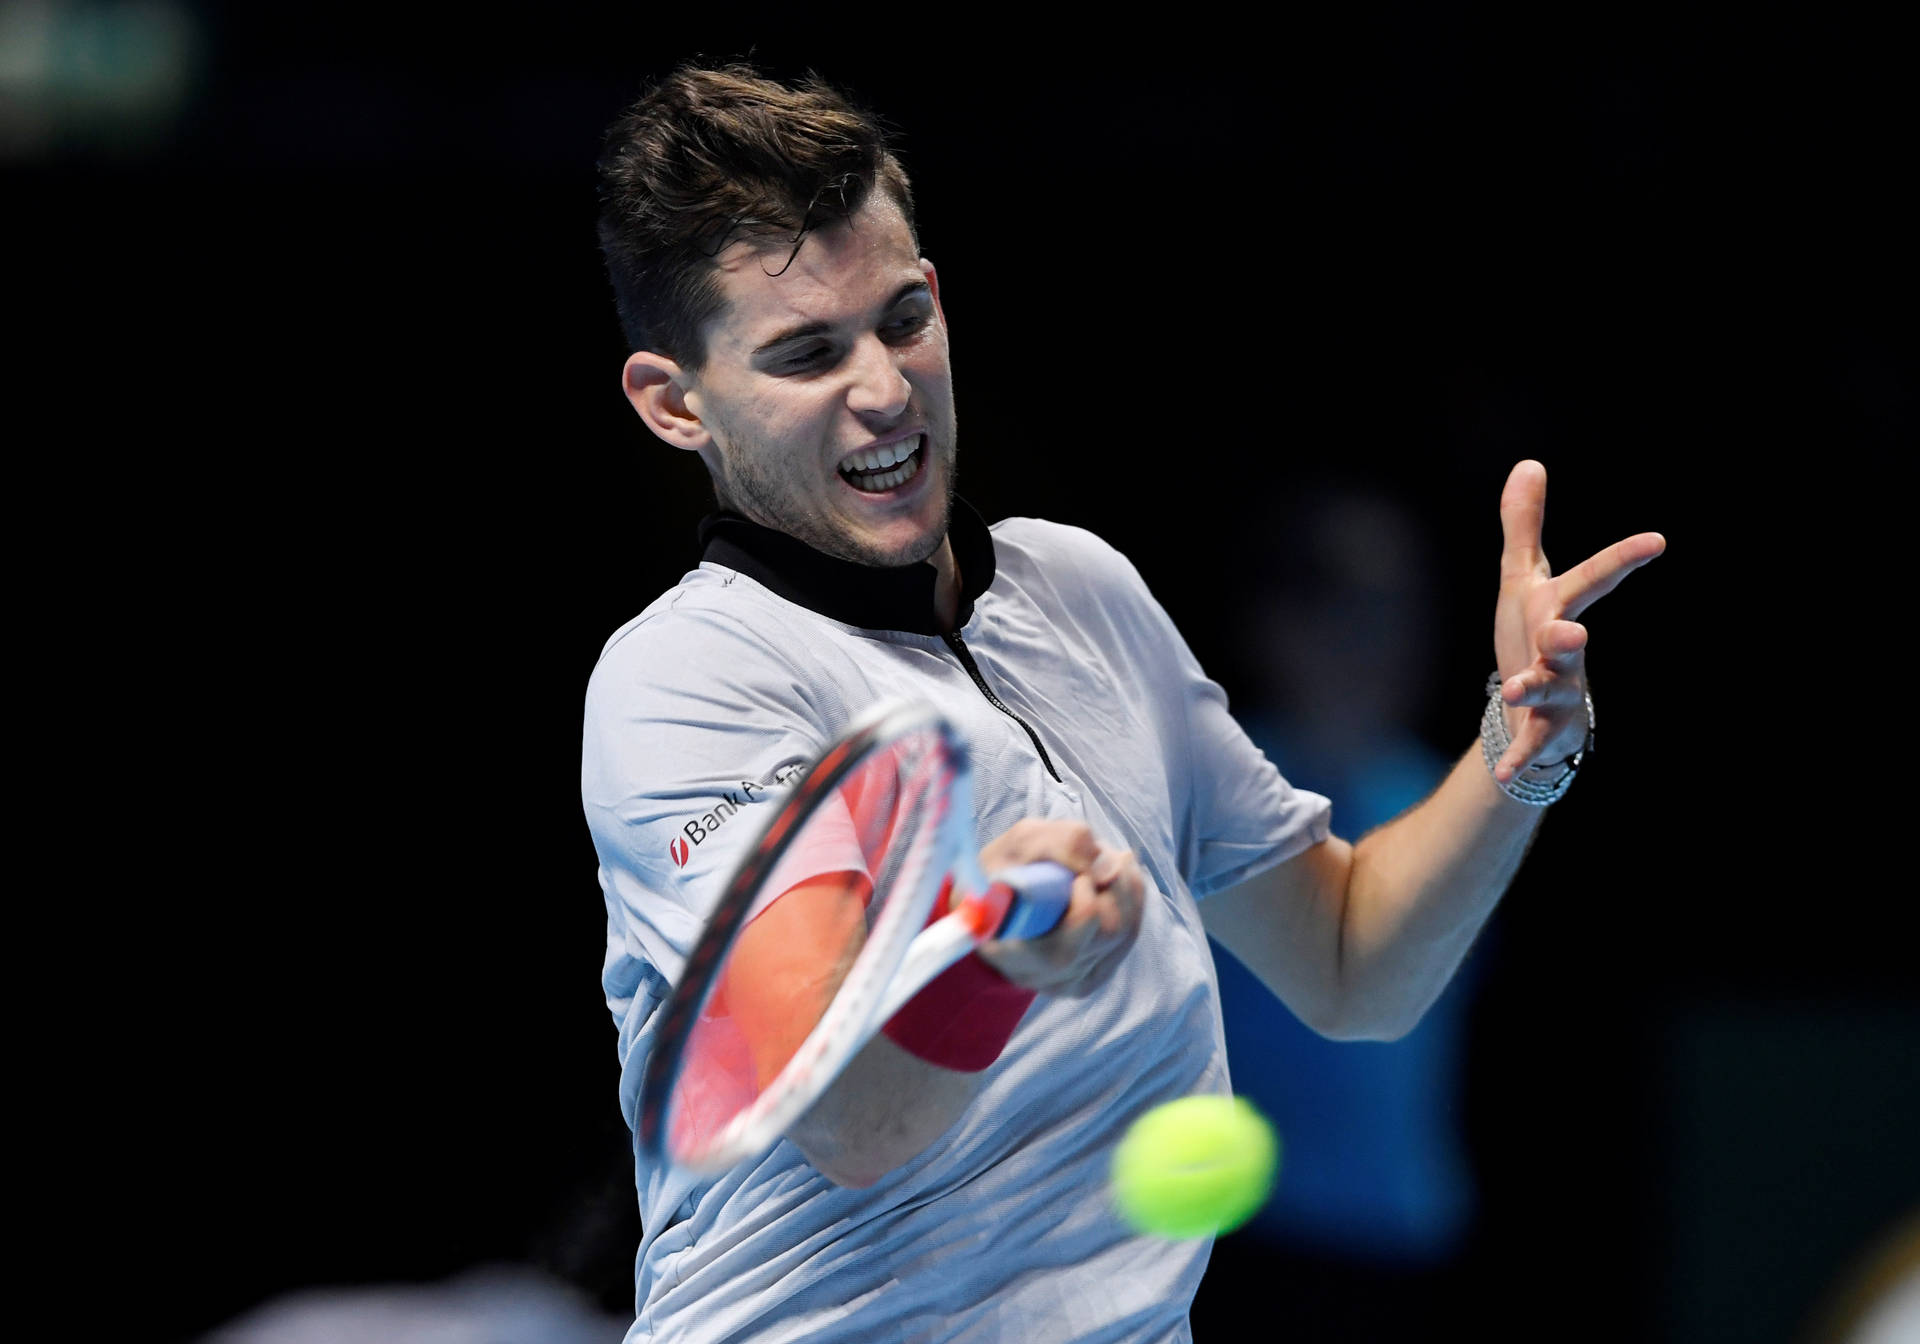 Professional Tennis Player Dominic Thiem in Action Wallpaper